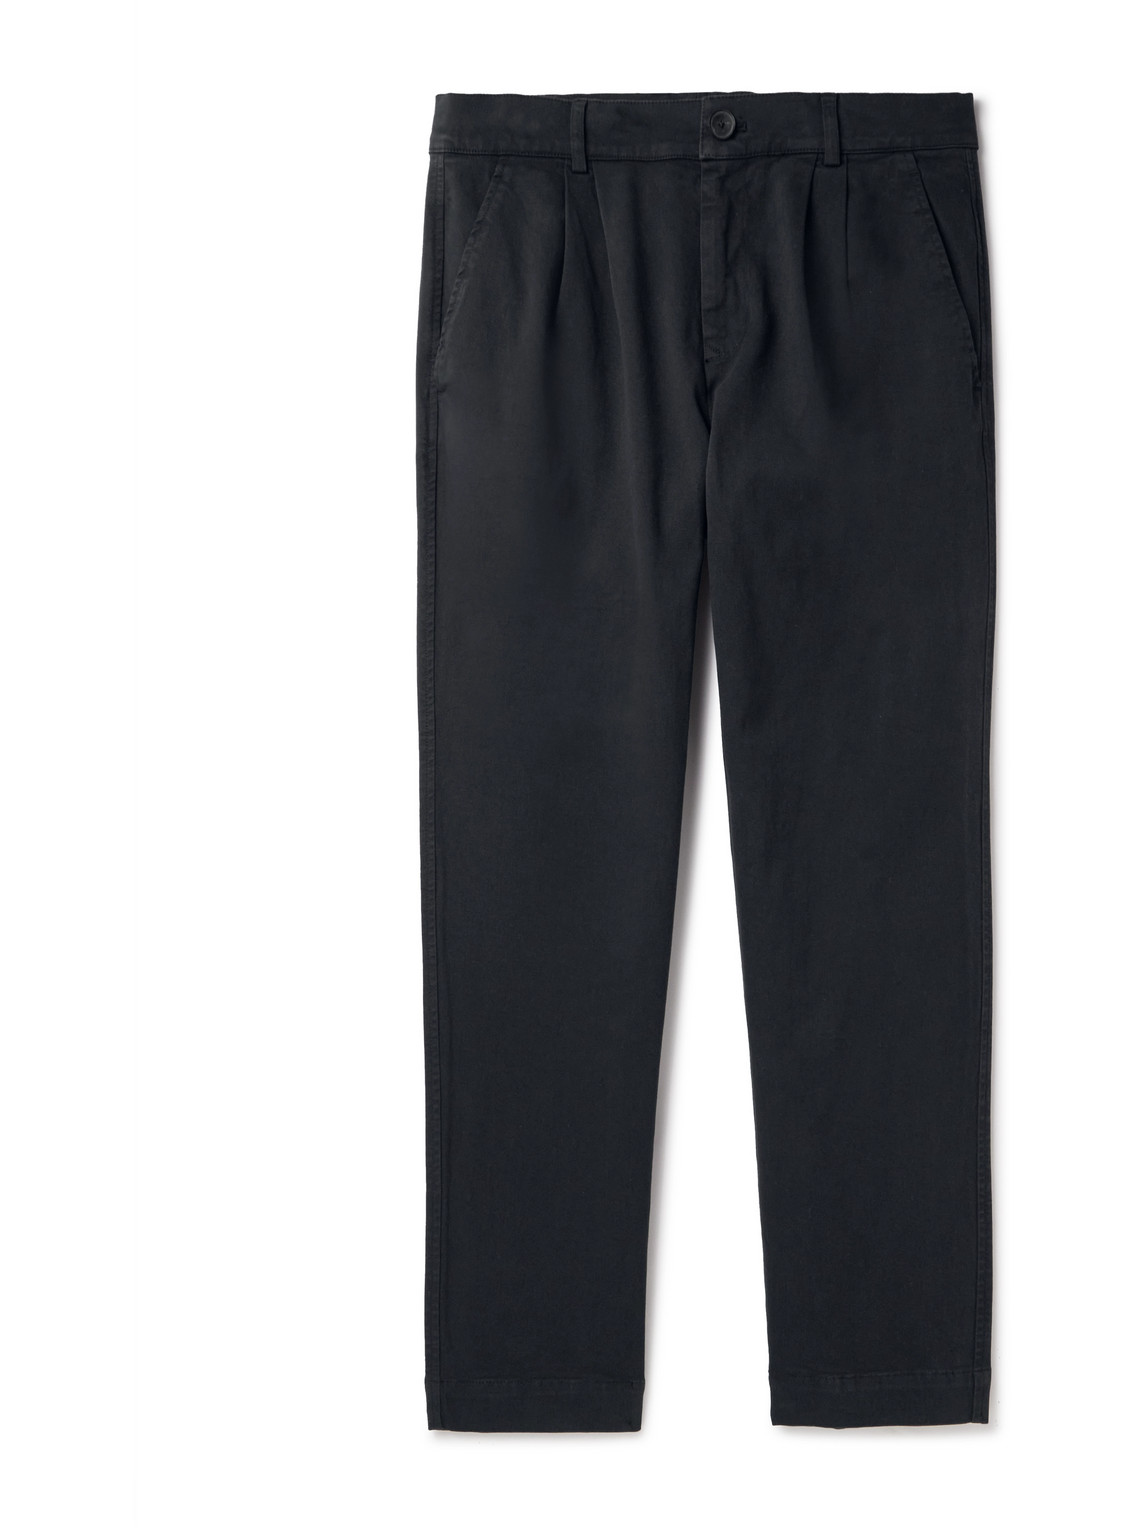 Mr P Tapered Pleated Garment-dyed Cotton-blend Twill Trousers In Black